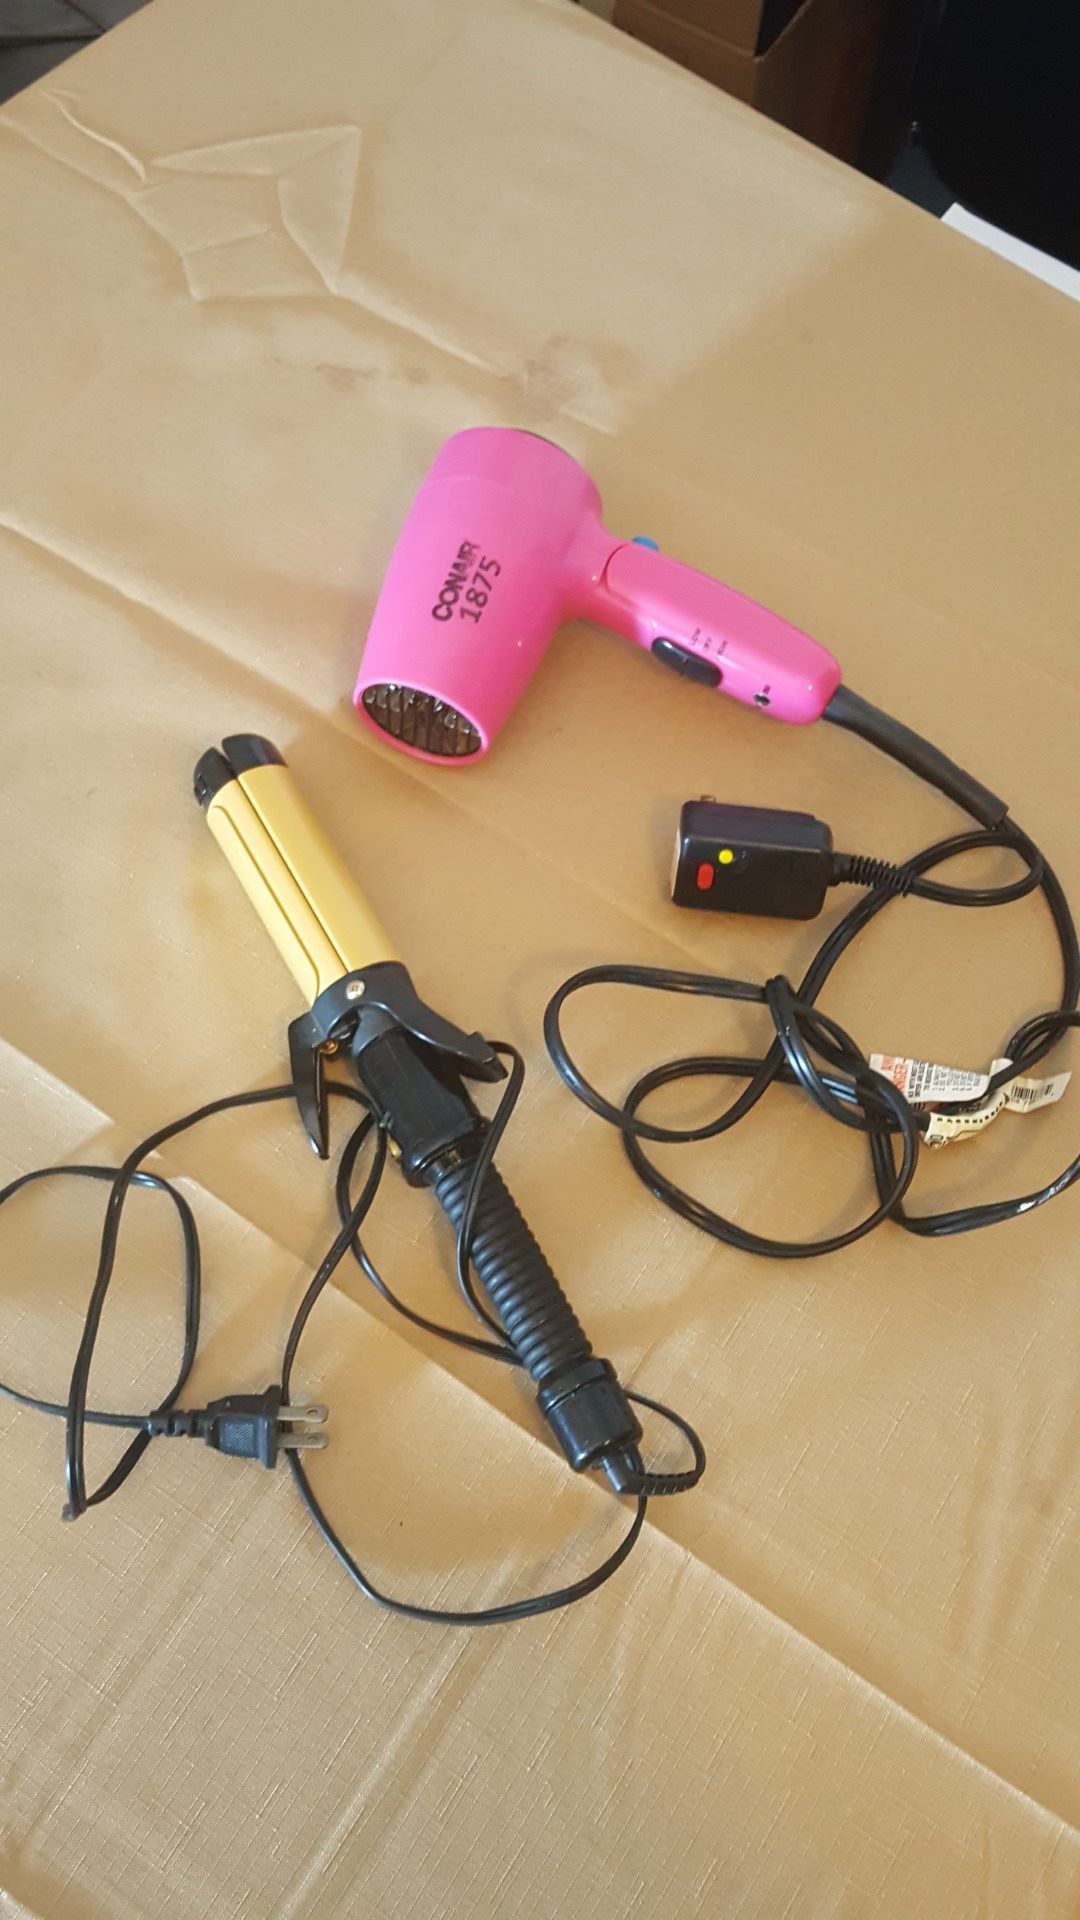 Conair straighter/ curler and dryer